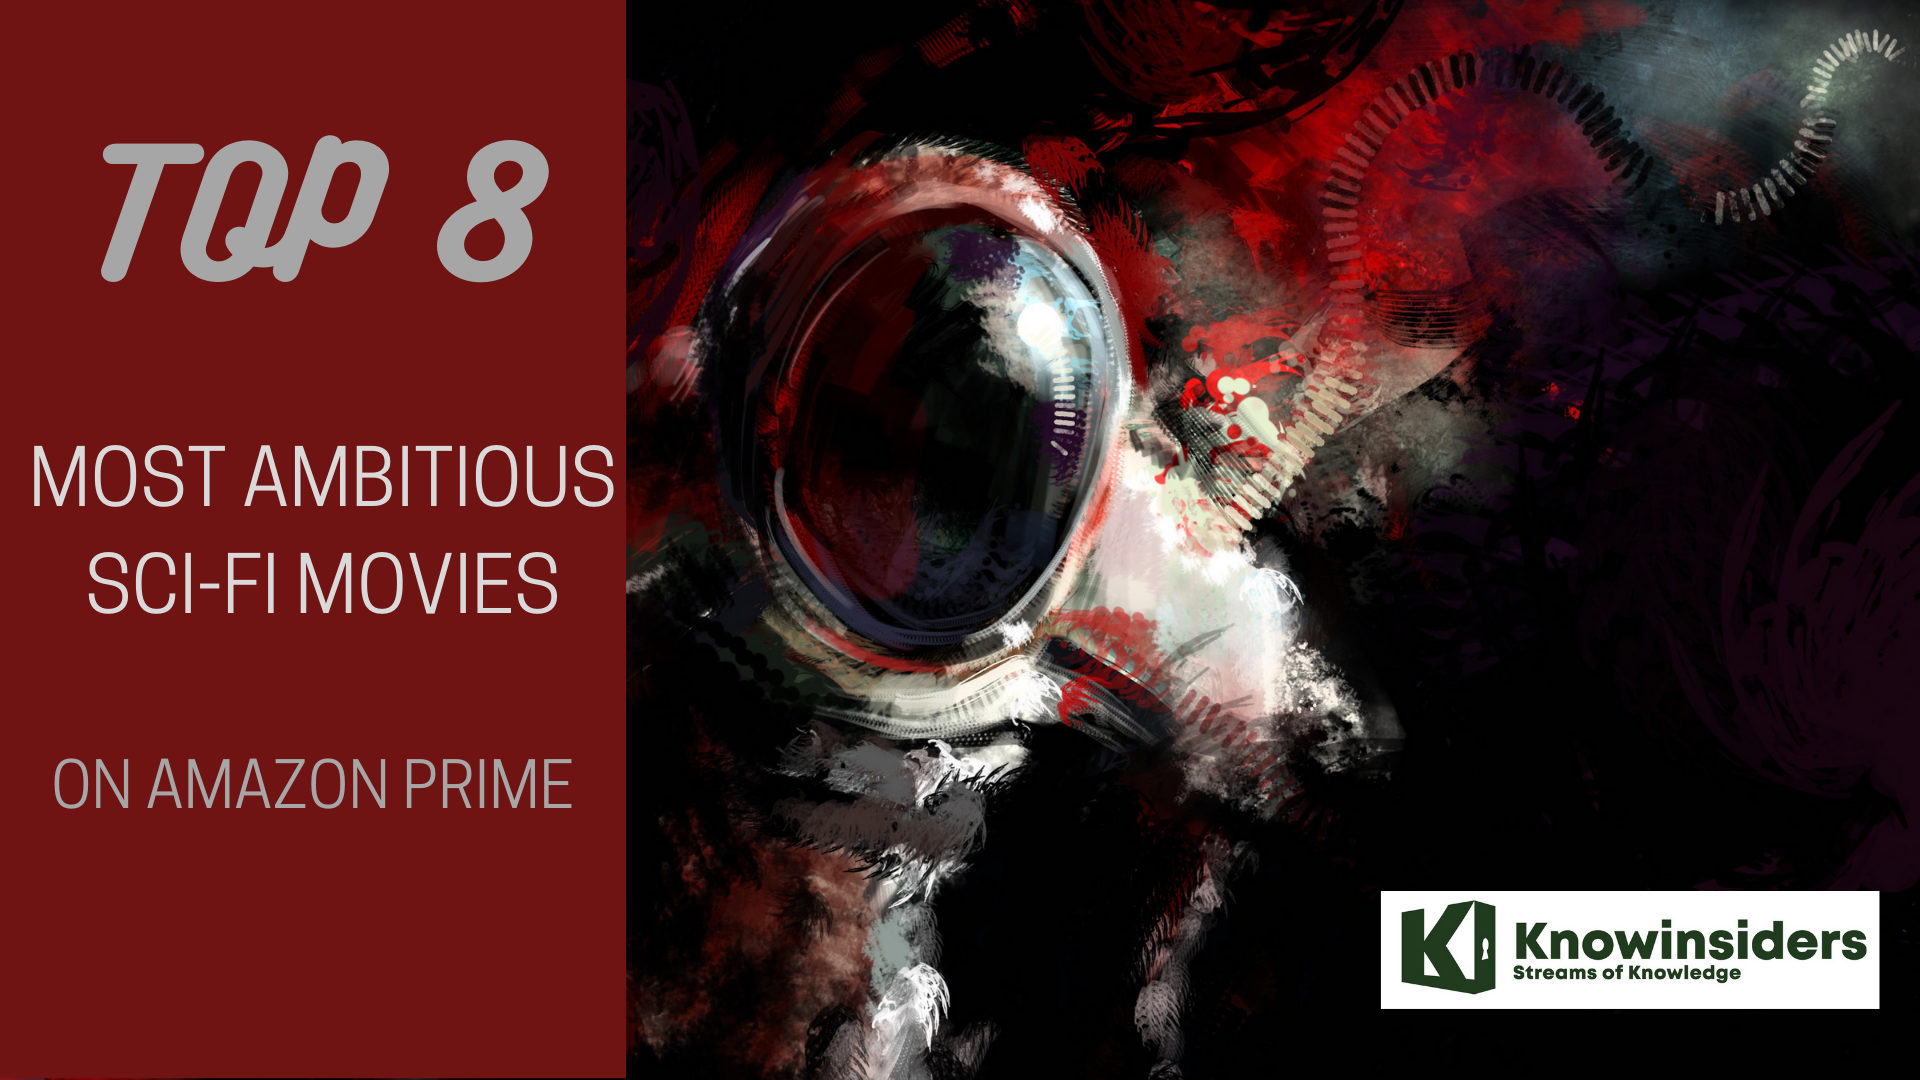 Top 8 Most Ambitious Sci-fi Movies On Amazon Prime